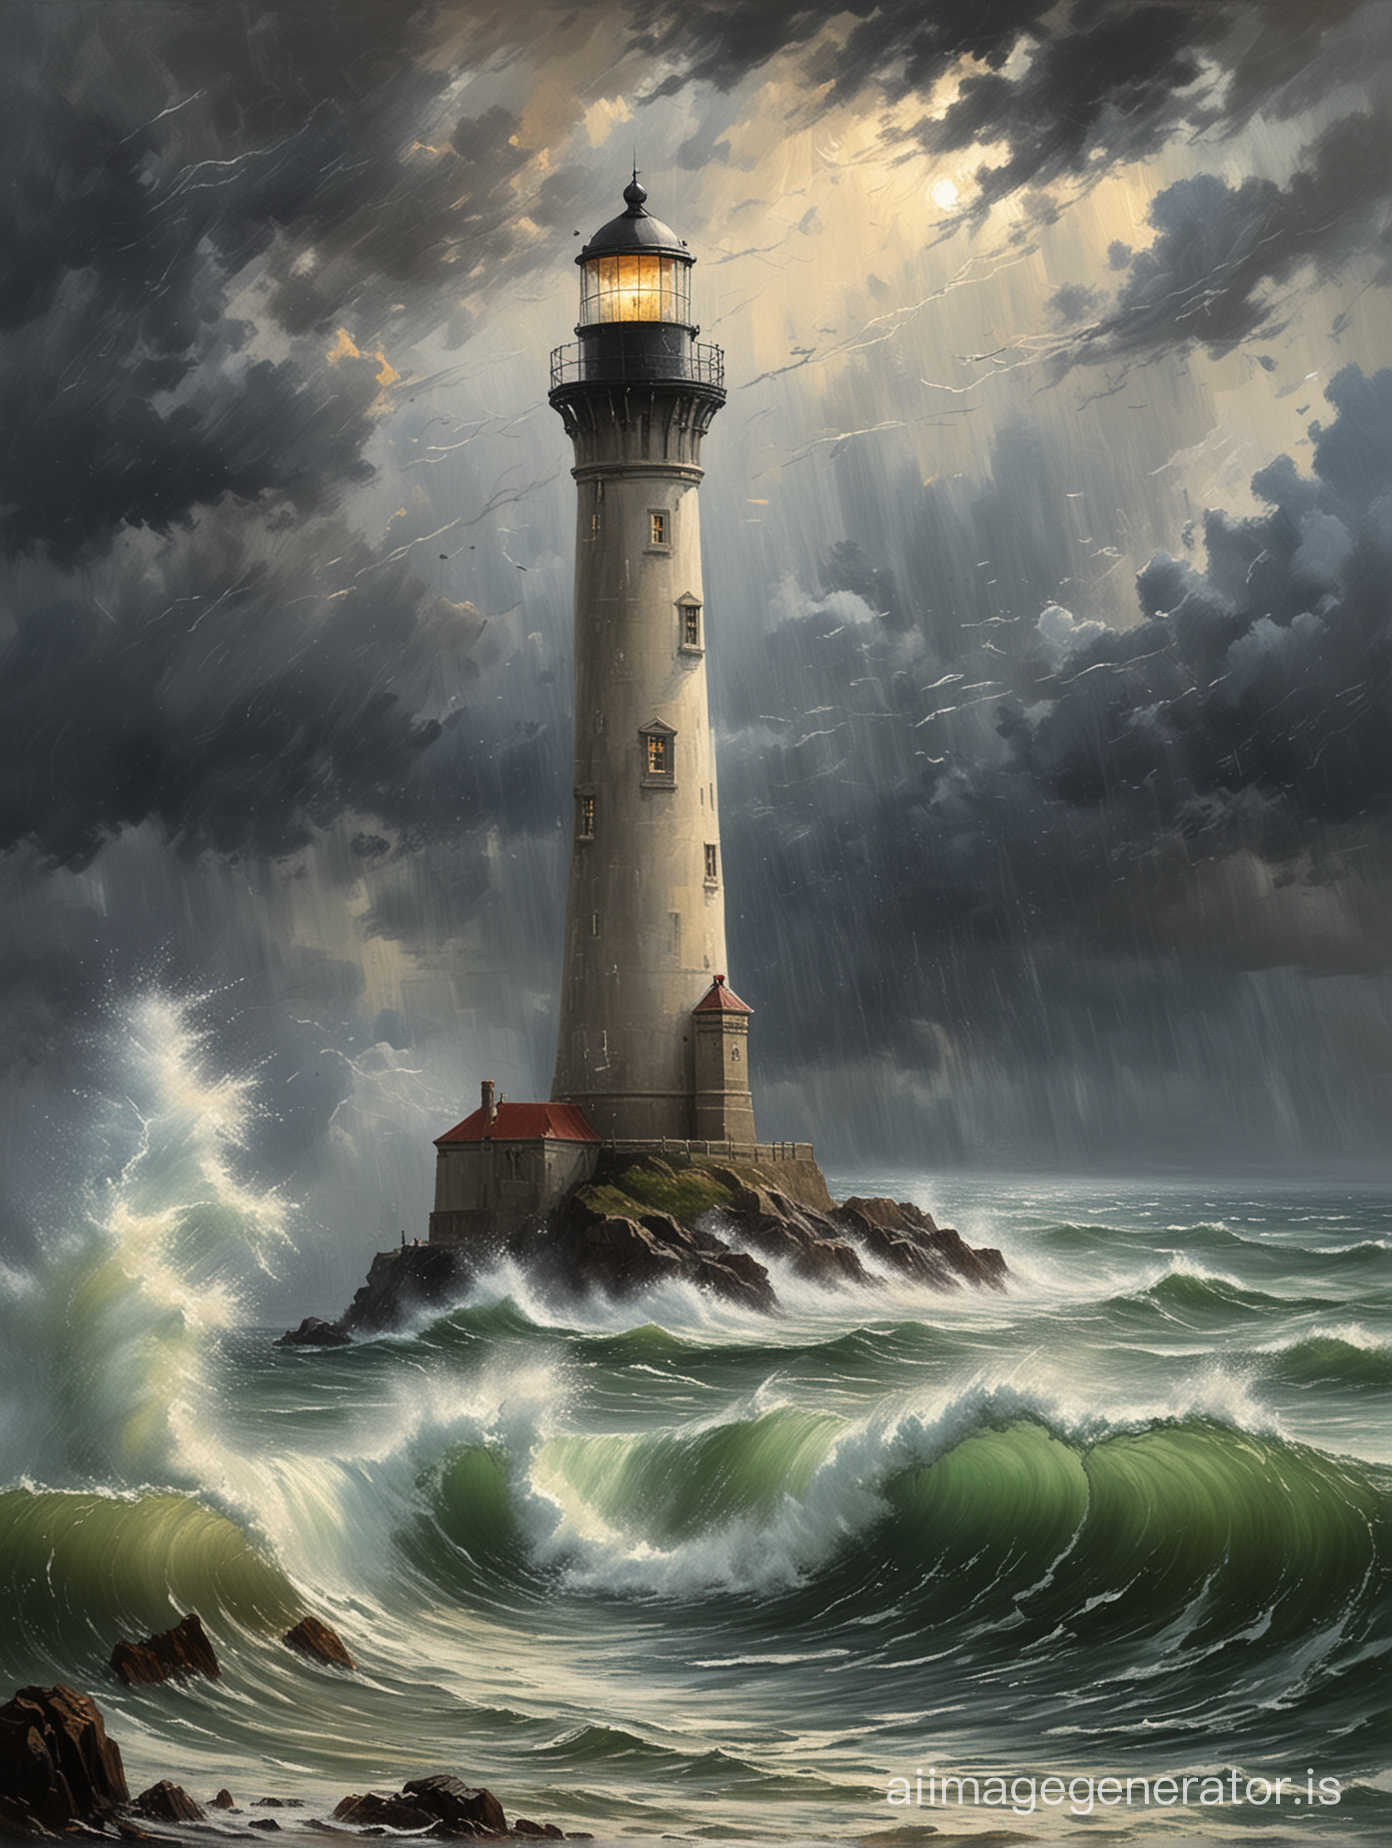 Monet oil painting of a lighthouse during a very stormy event